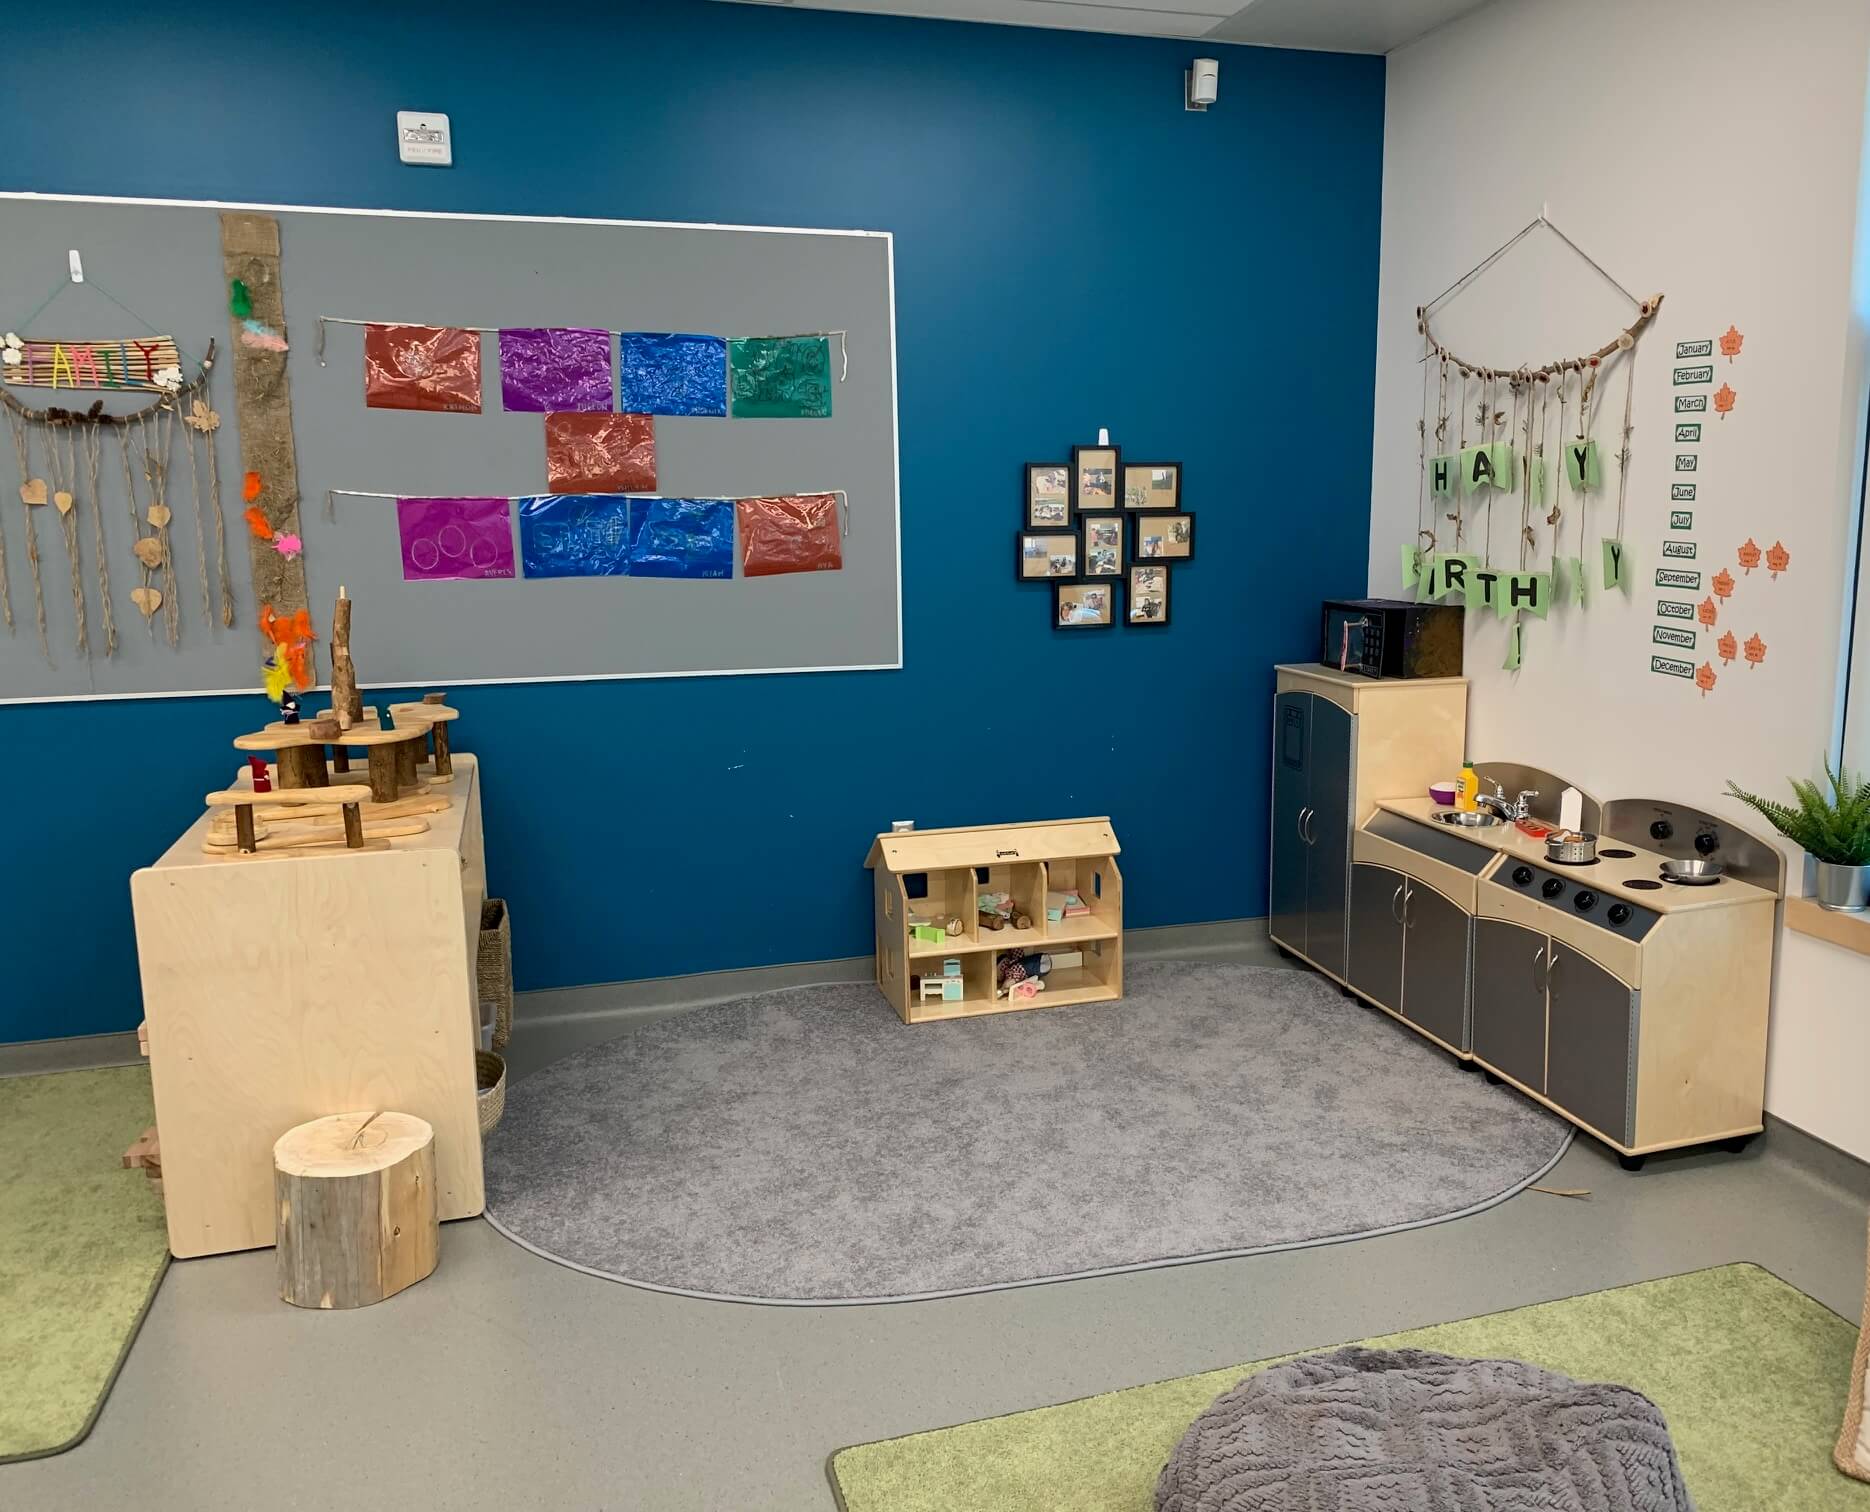 Templeton School – O.K. Before & After School Child Care Centres Inc.